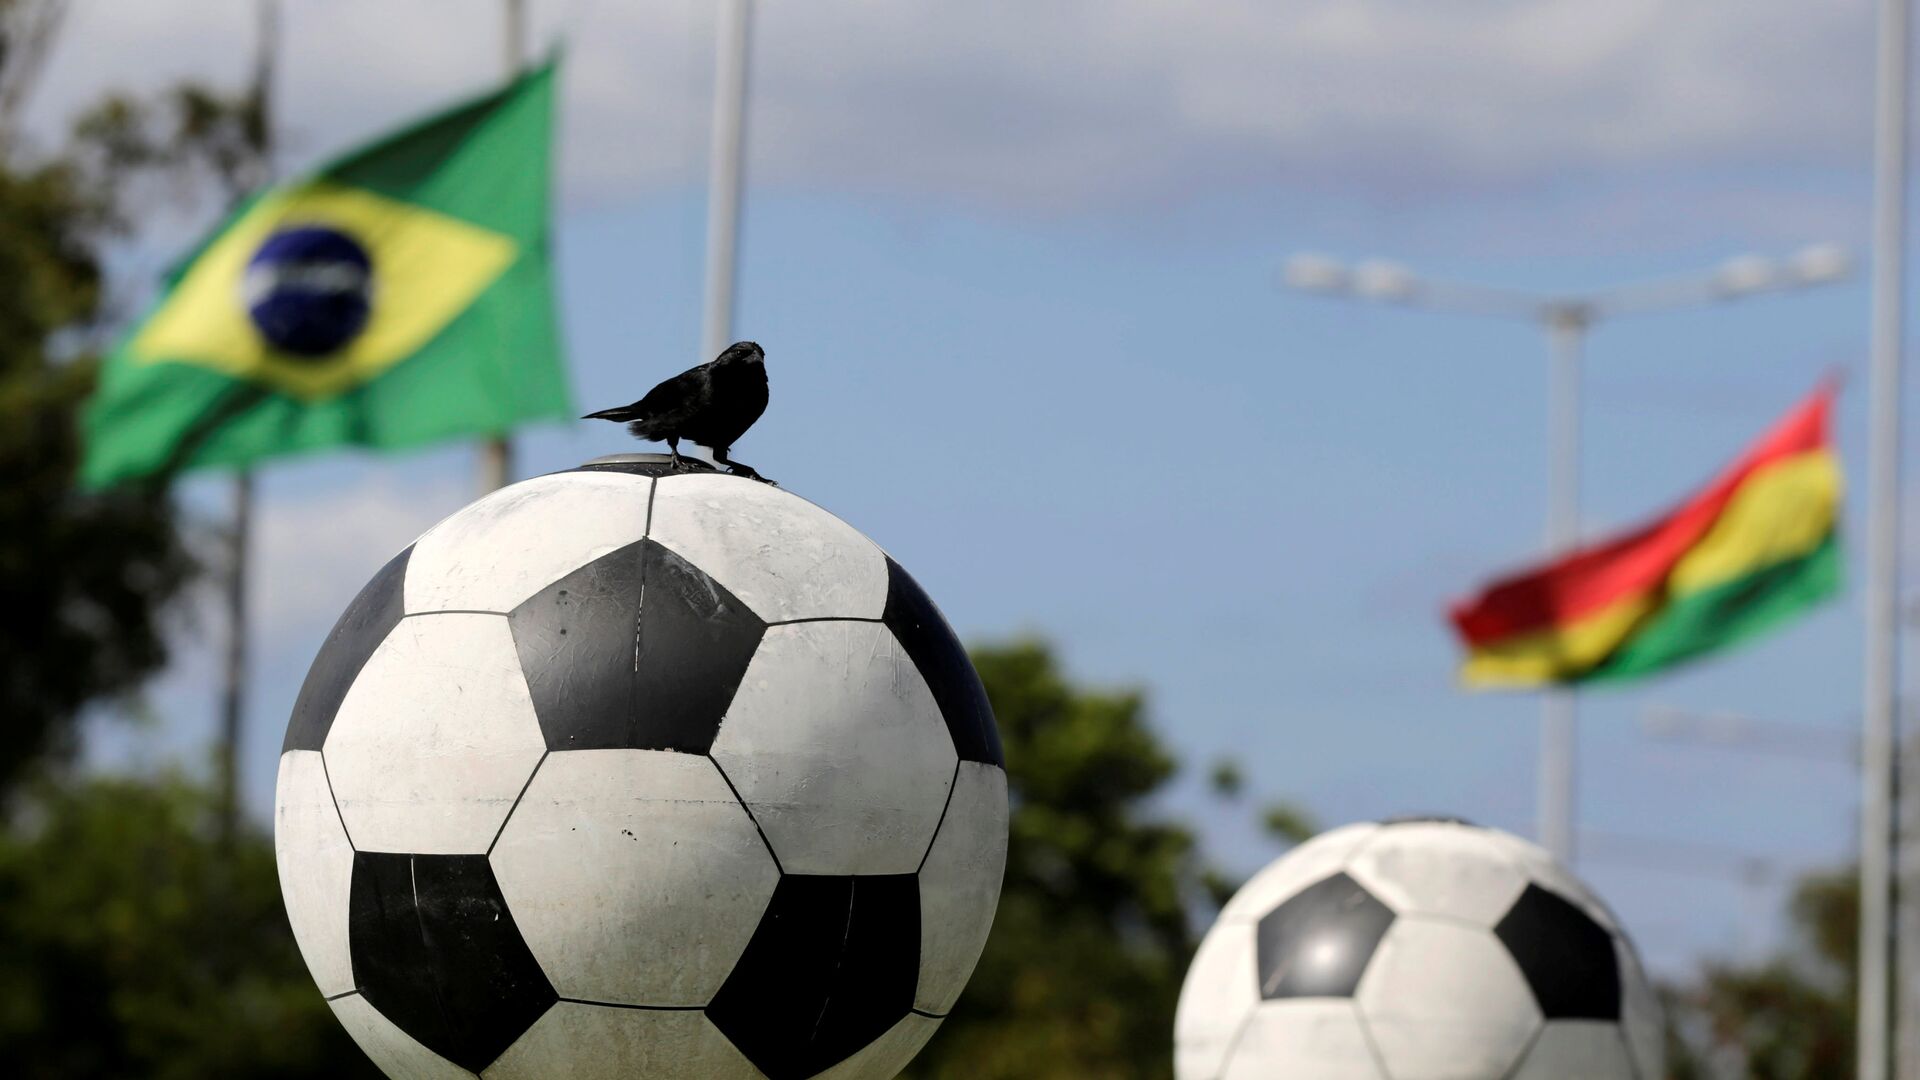 A bird sits on a ball in front of flags of Brazil and member countries of the South American Soccer Confederation (CONMEBOL) at half staff, paying tribute to members of Chapecoense soccer team in a plane crash in Colombia, in front of the headquarters in Luque, Paraguay - Sputnik Mundo, 1920, 24.08.2021